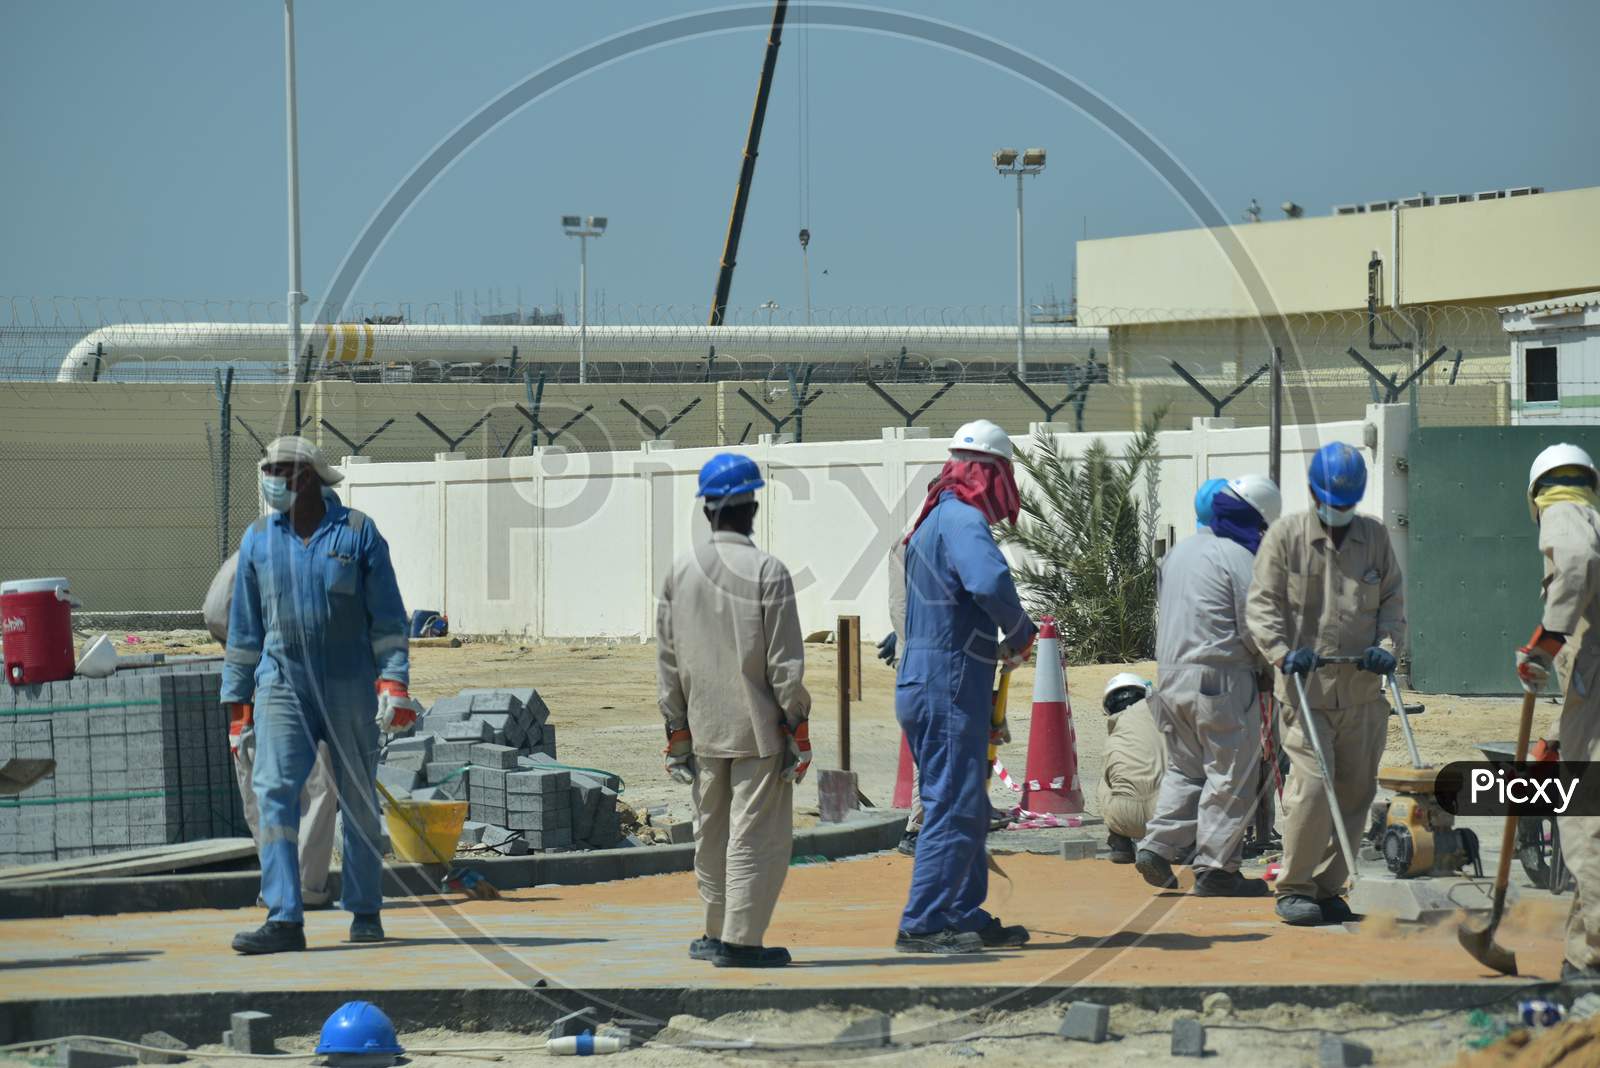 Construction Workers Digging Trench Using Shovels. Abu Dhabi,Uae.03.10.2020.